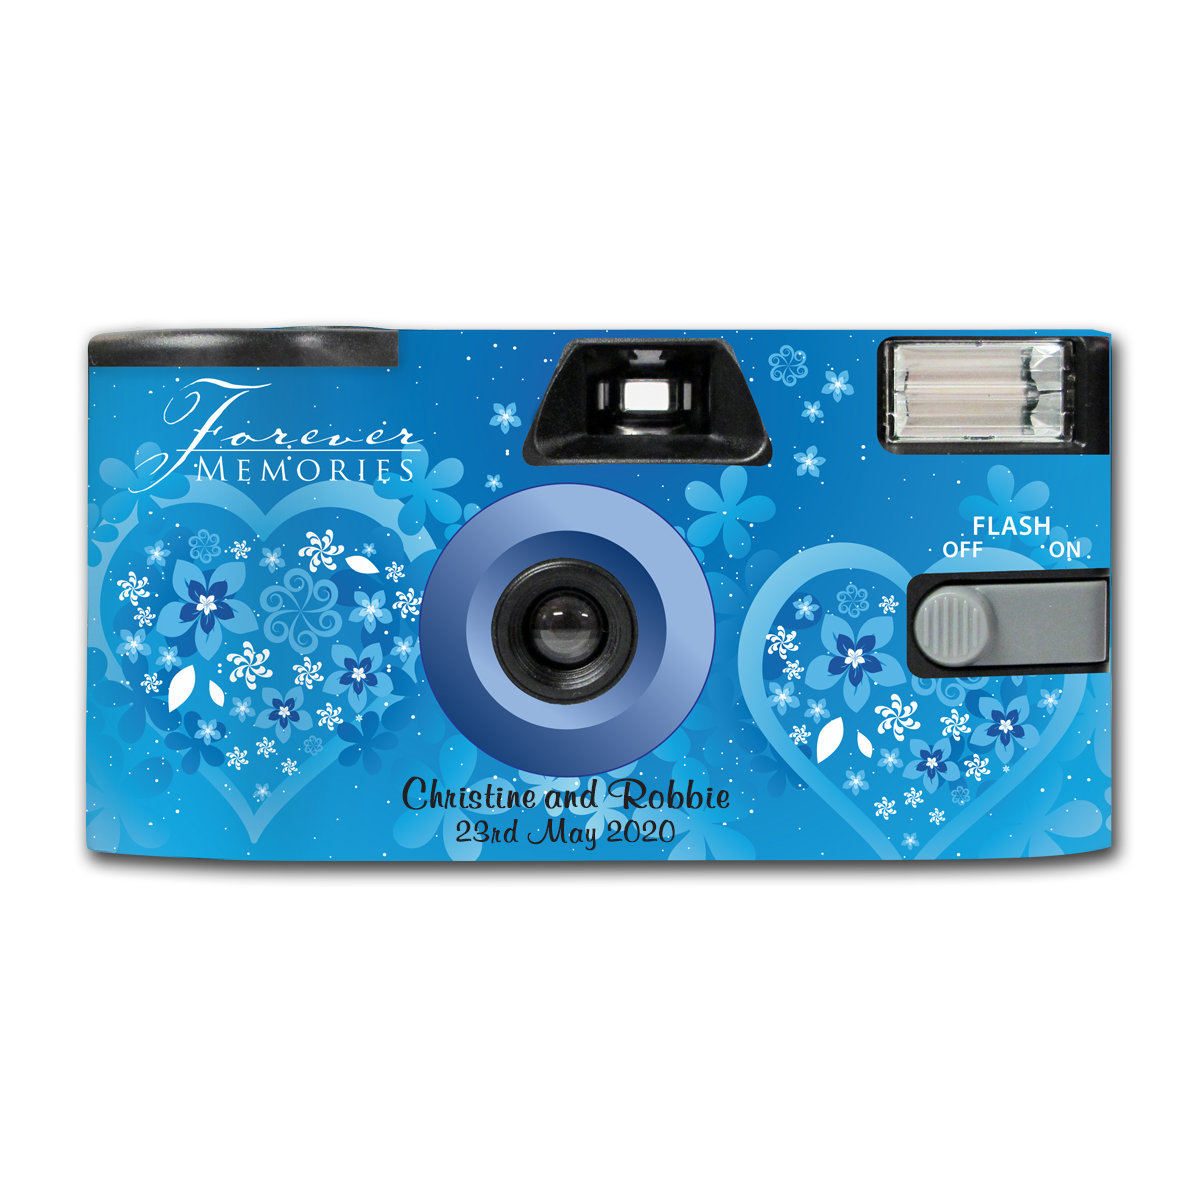 Flowers in Blue - Disposable Camera Company